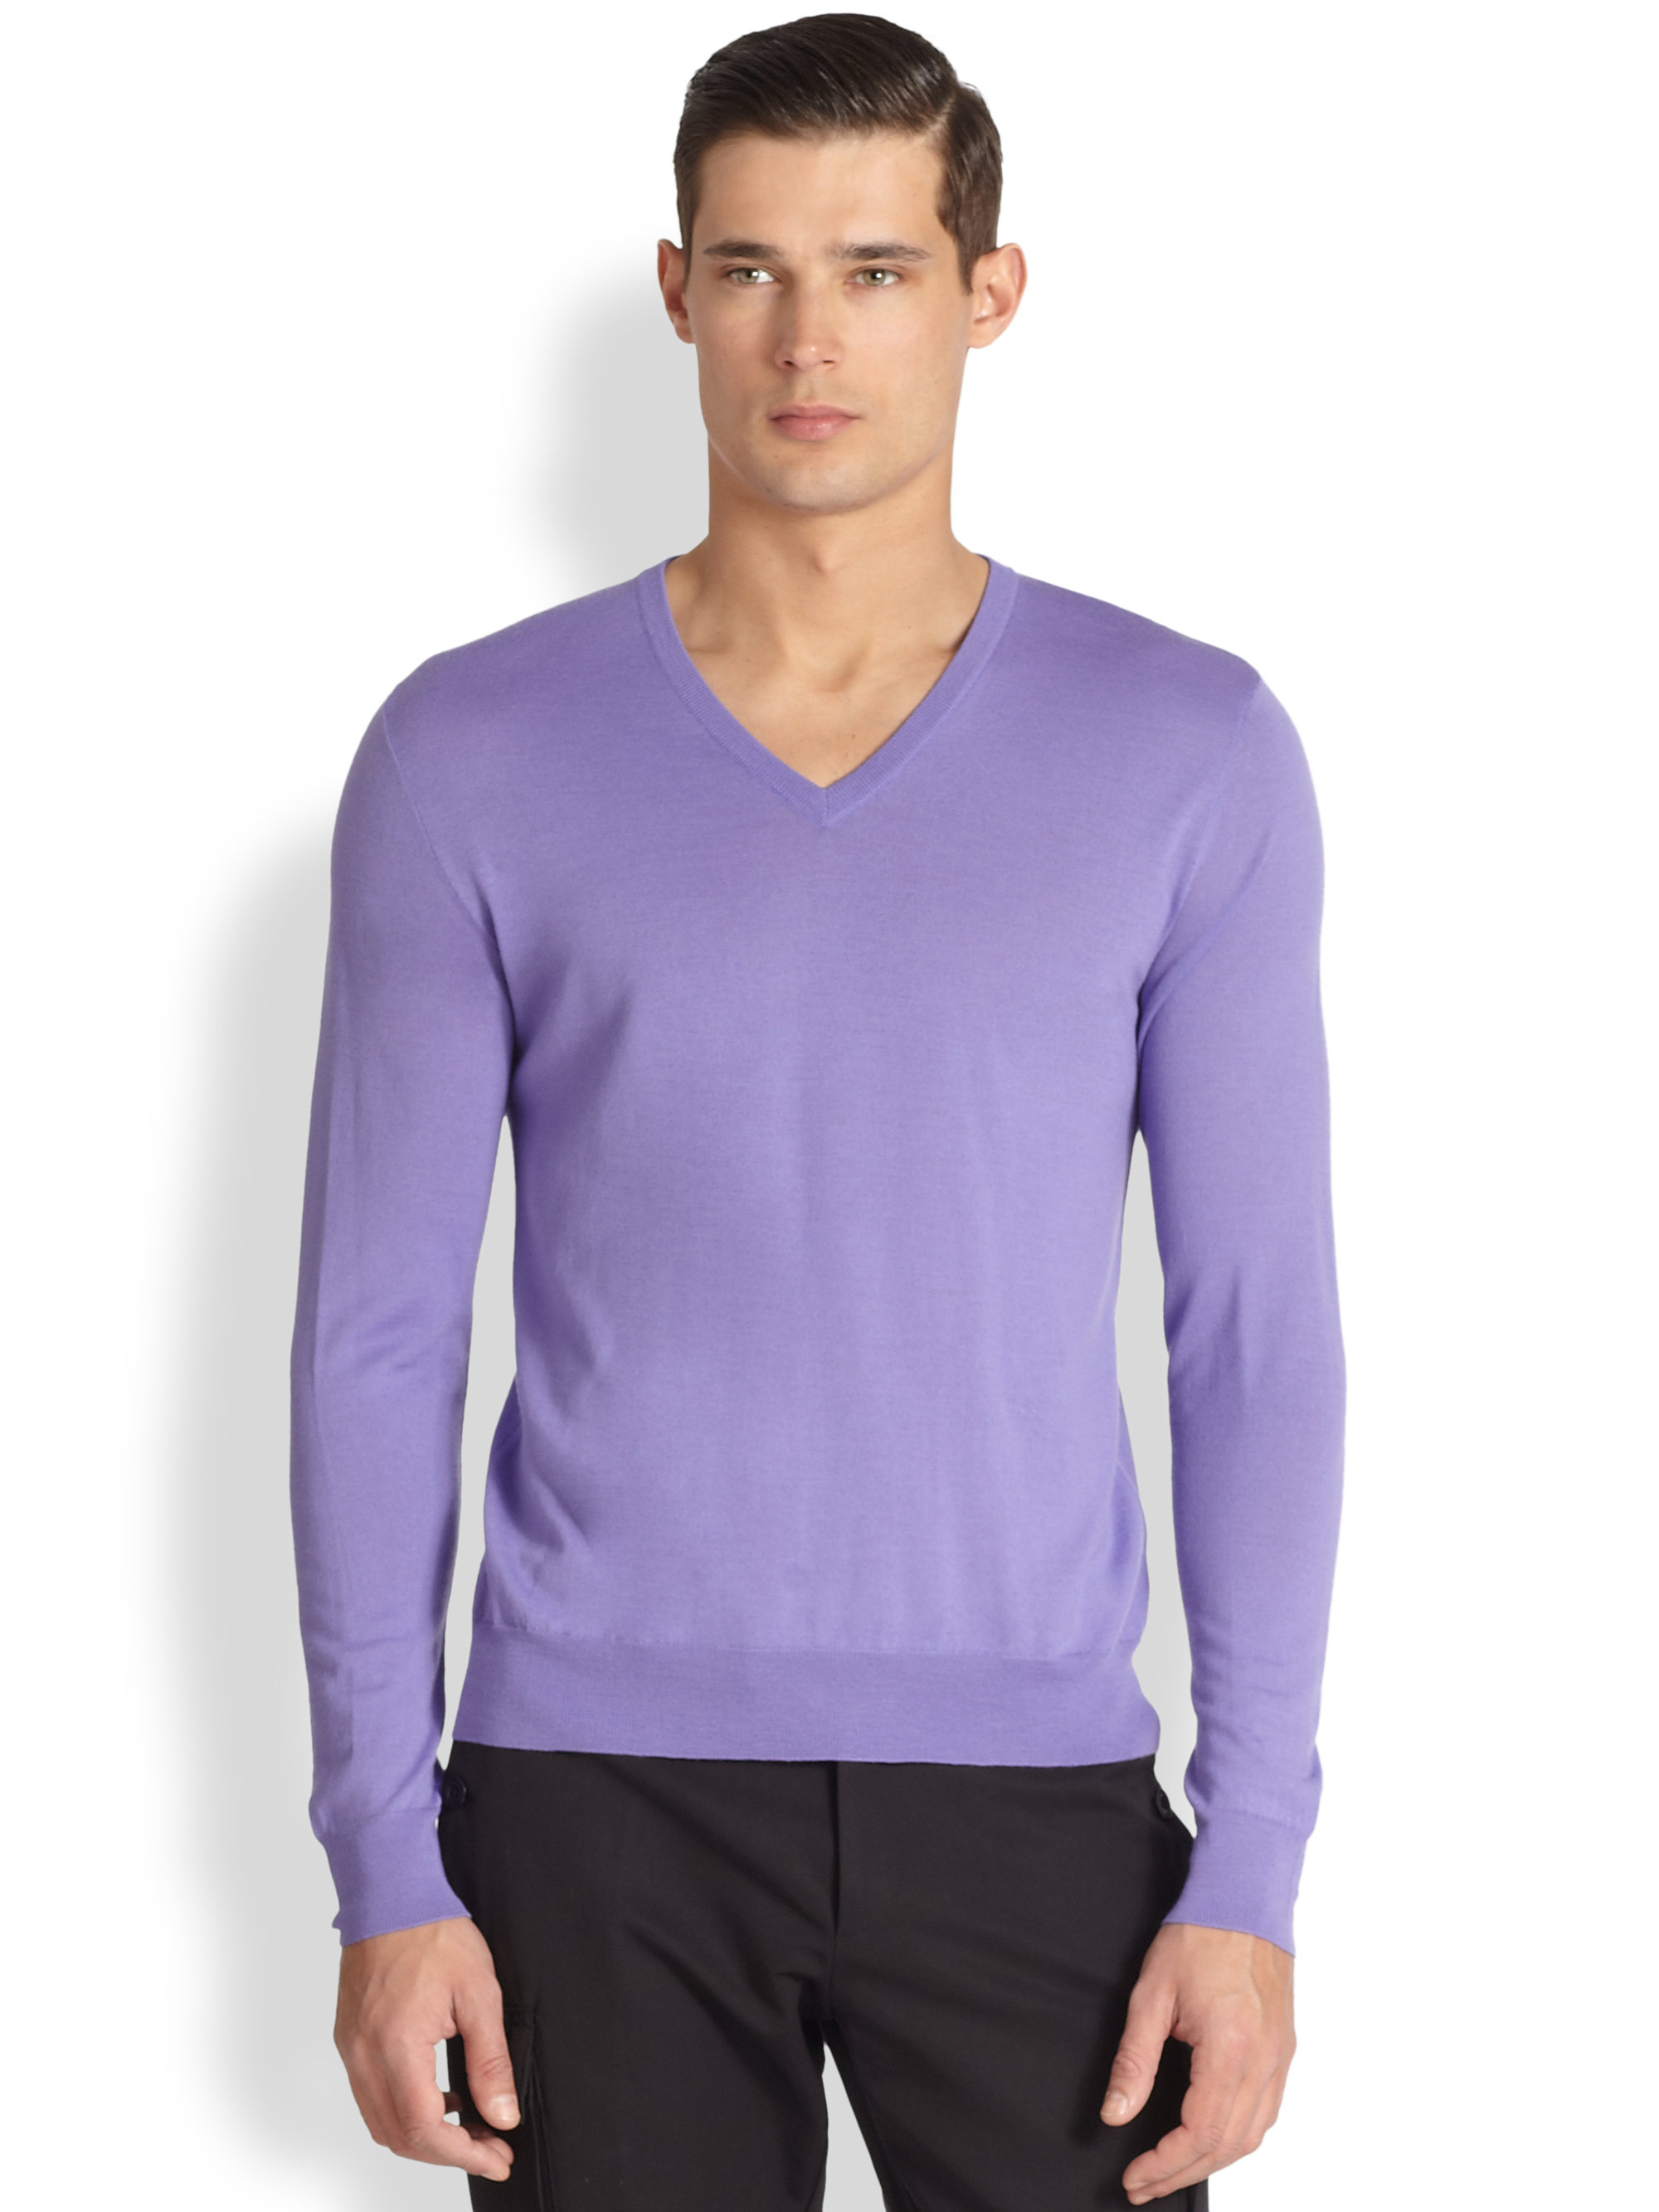 Ralph Lauren Black Label Wool And Cashmere V-Neck Sweater in Purple for